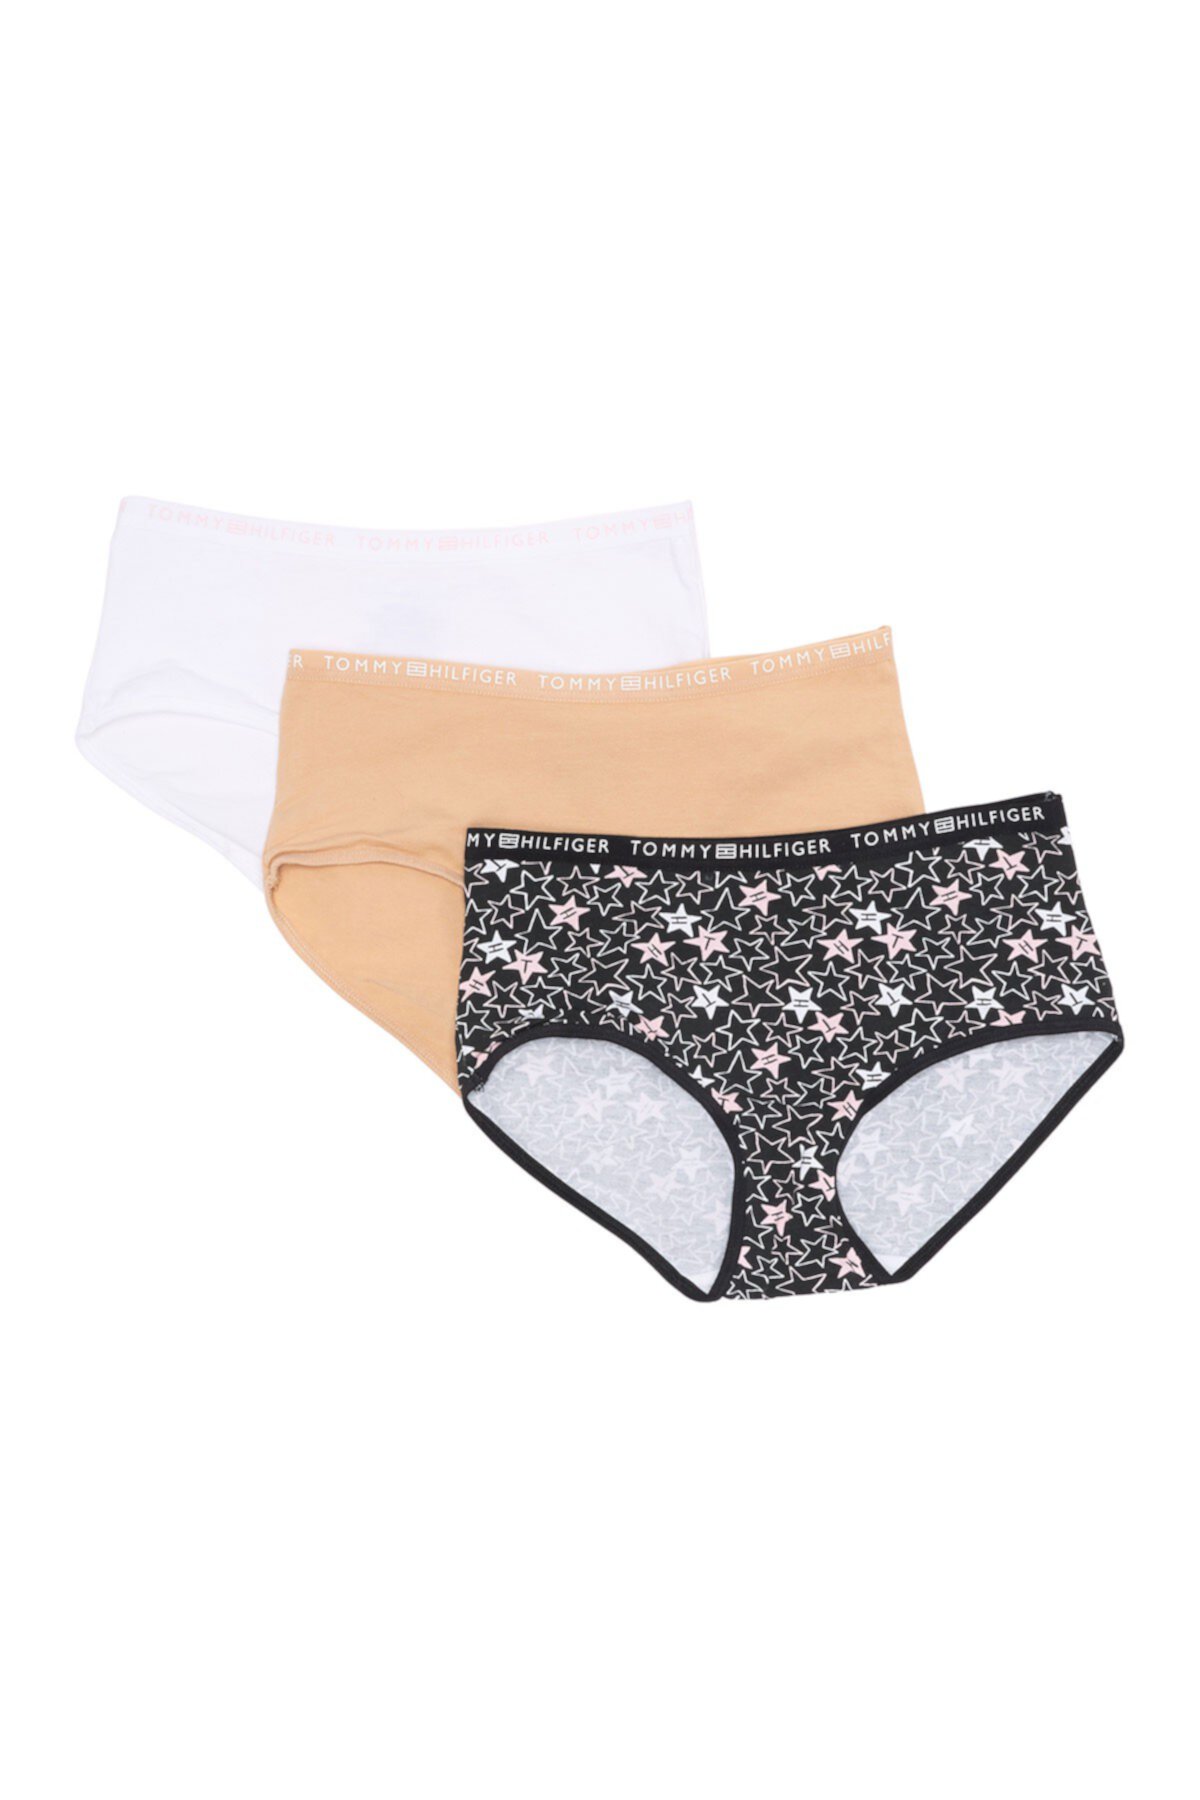 Heart Hipster Panties - Pack of 3 (Big Girls) Tommy Hilfiger